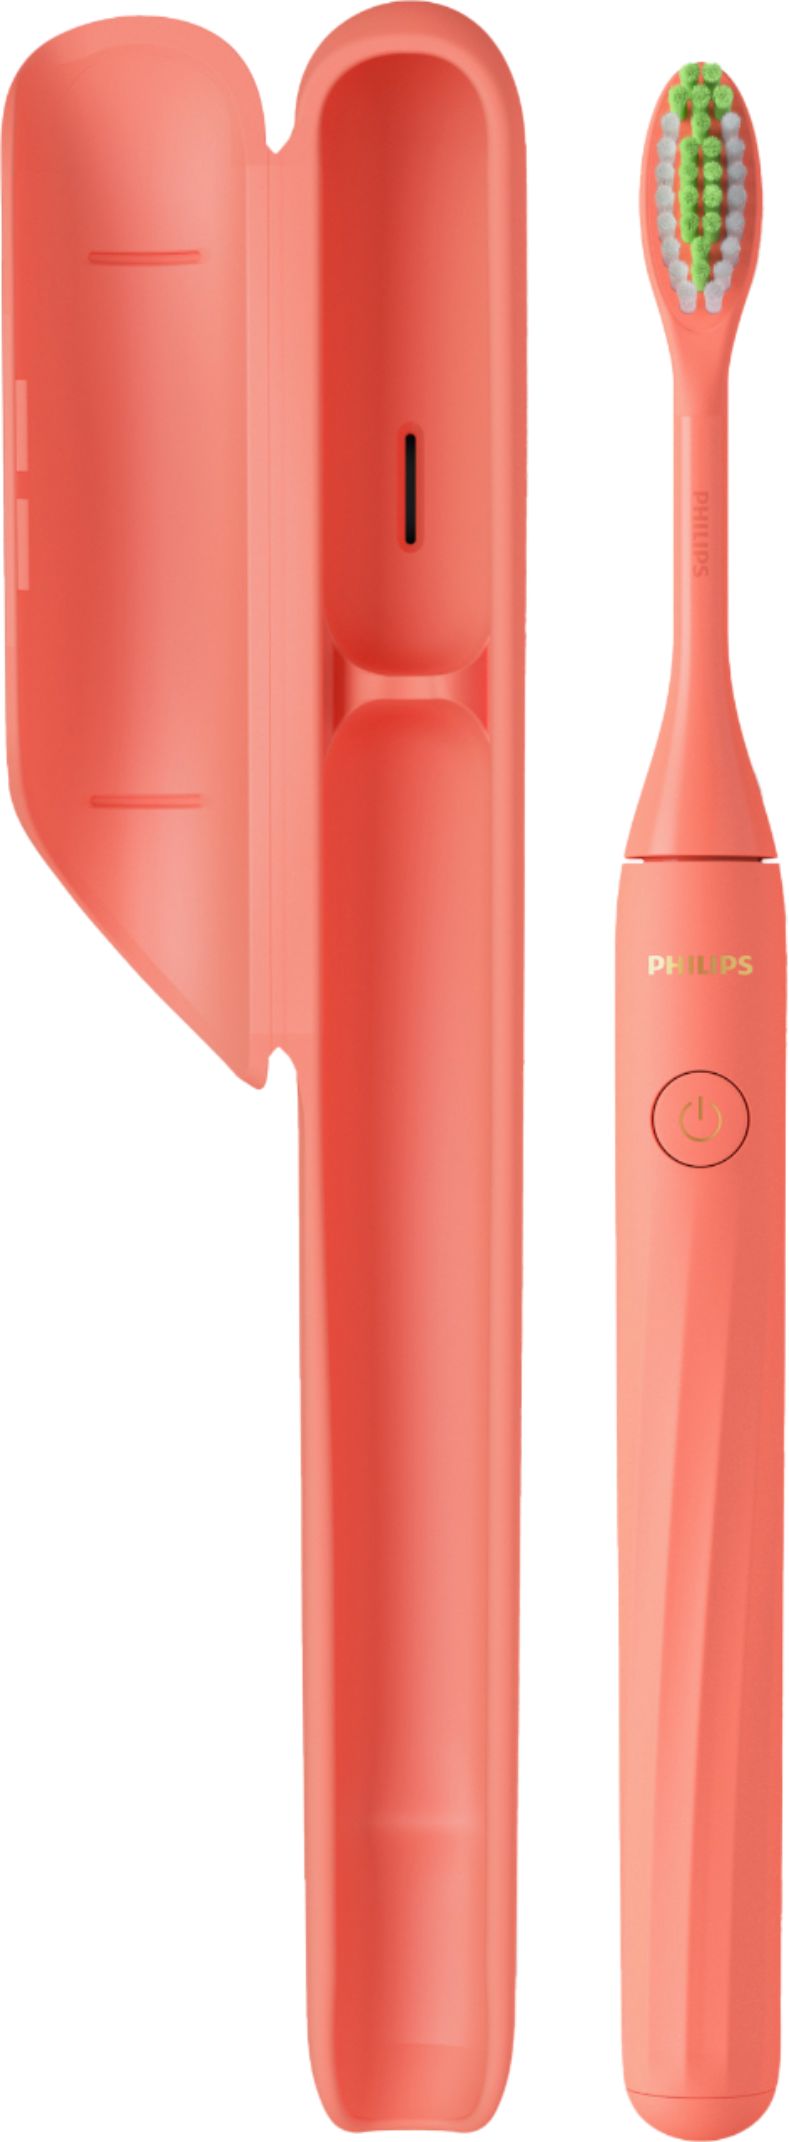 Angle View: Philips Sonicare - Philips One by Sonicare Battery Toothbrush - Miami Coral